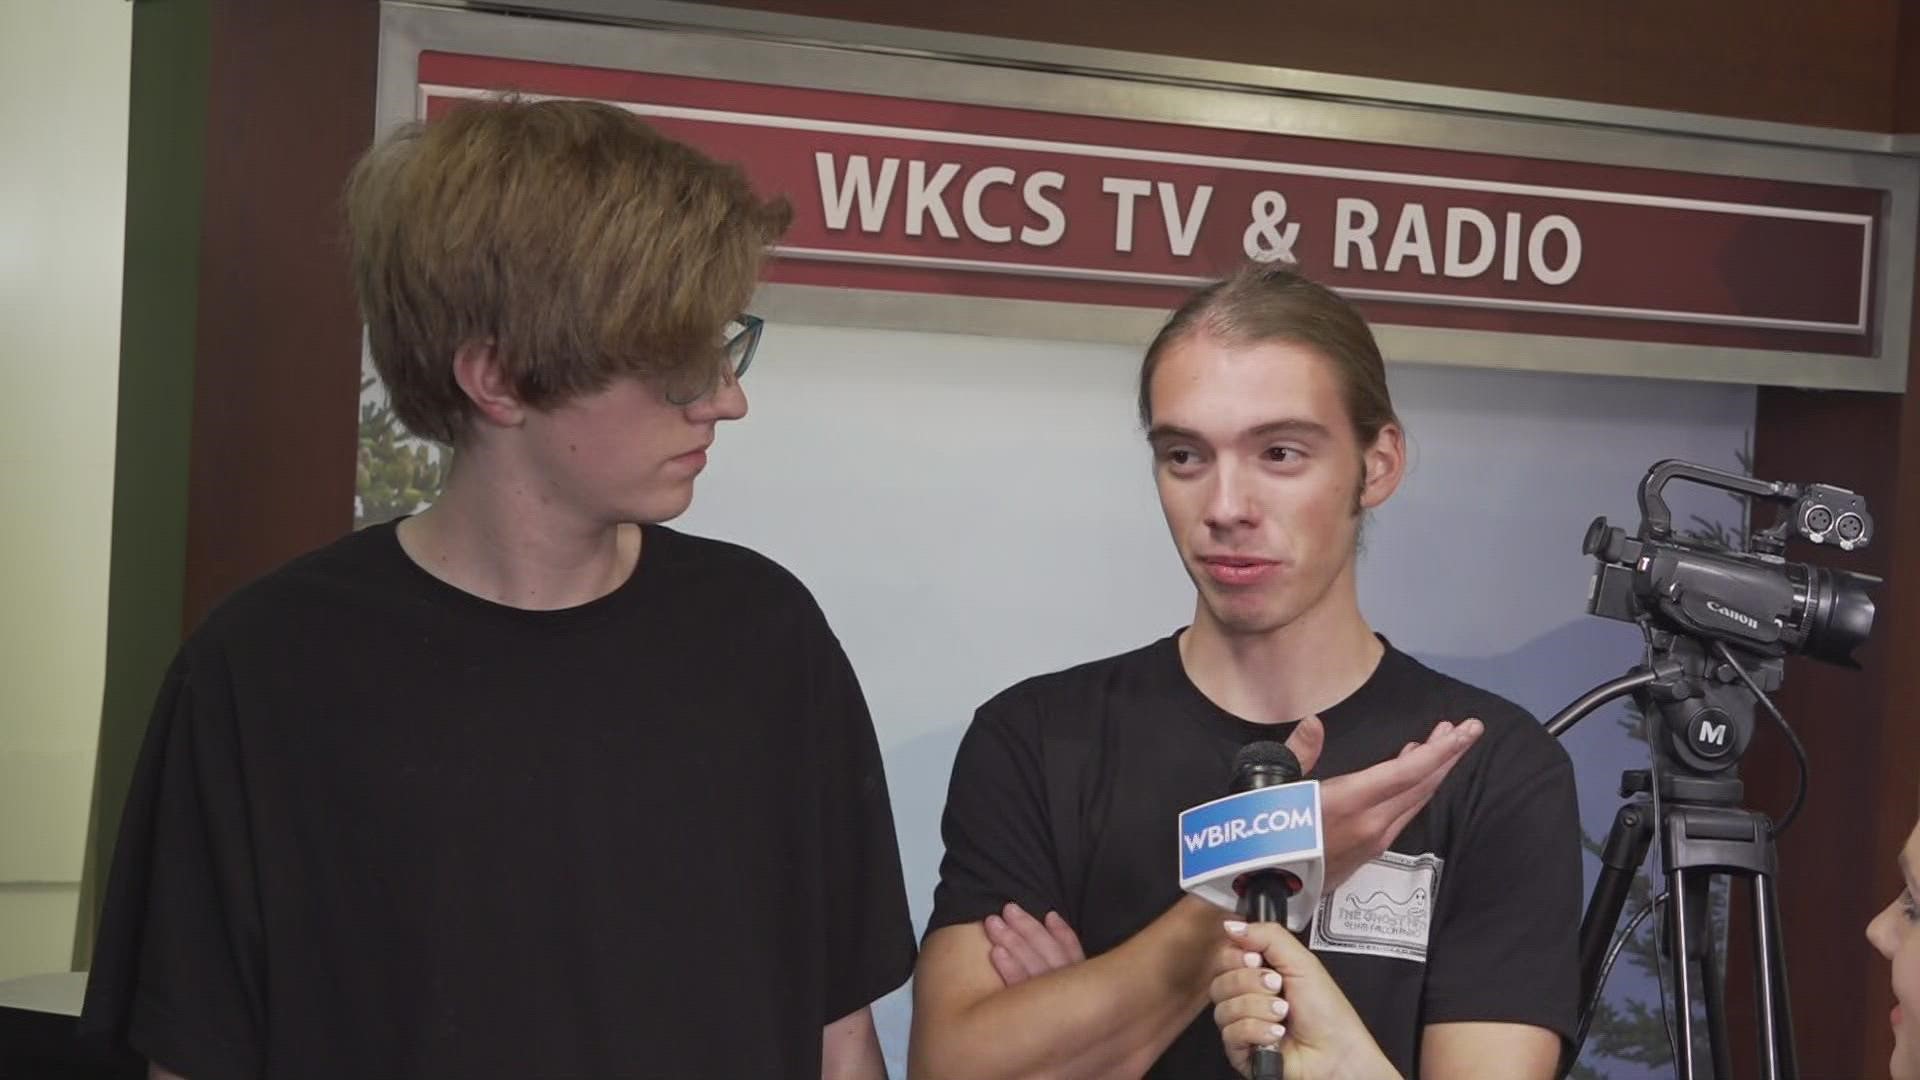 Some of the students that work at the Fulton High School radio station share thoughts on how they're preparing for the future. August 17, 2022-4pm.